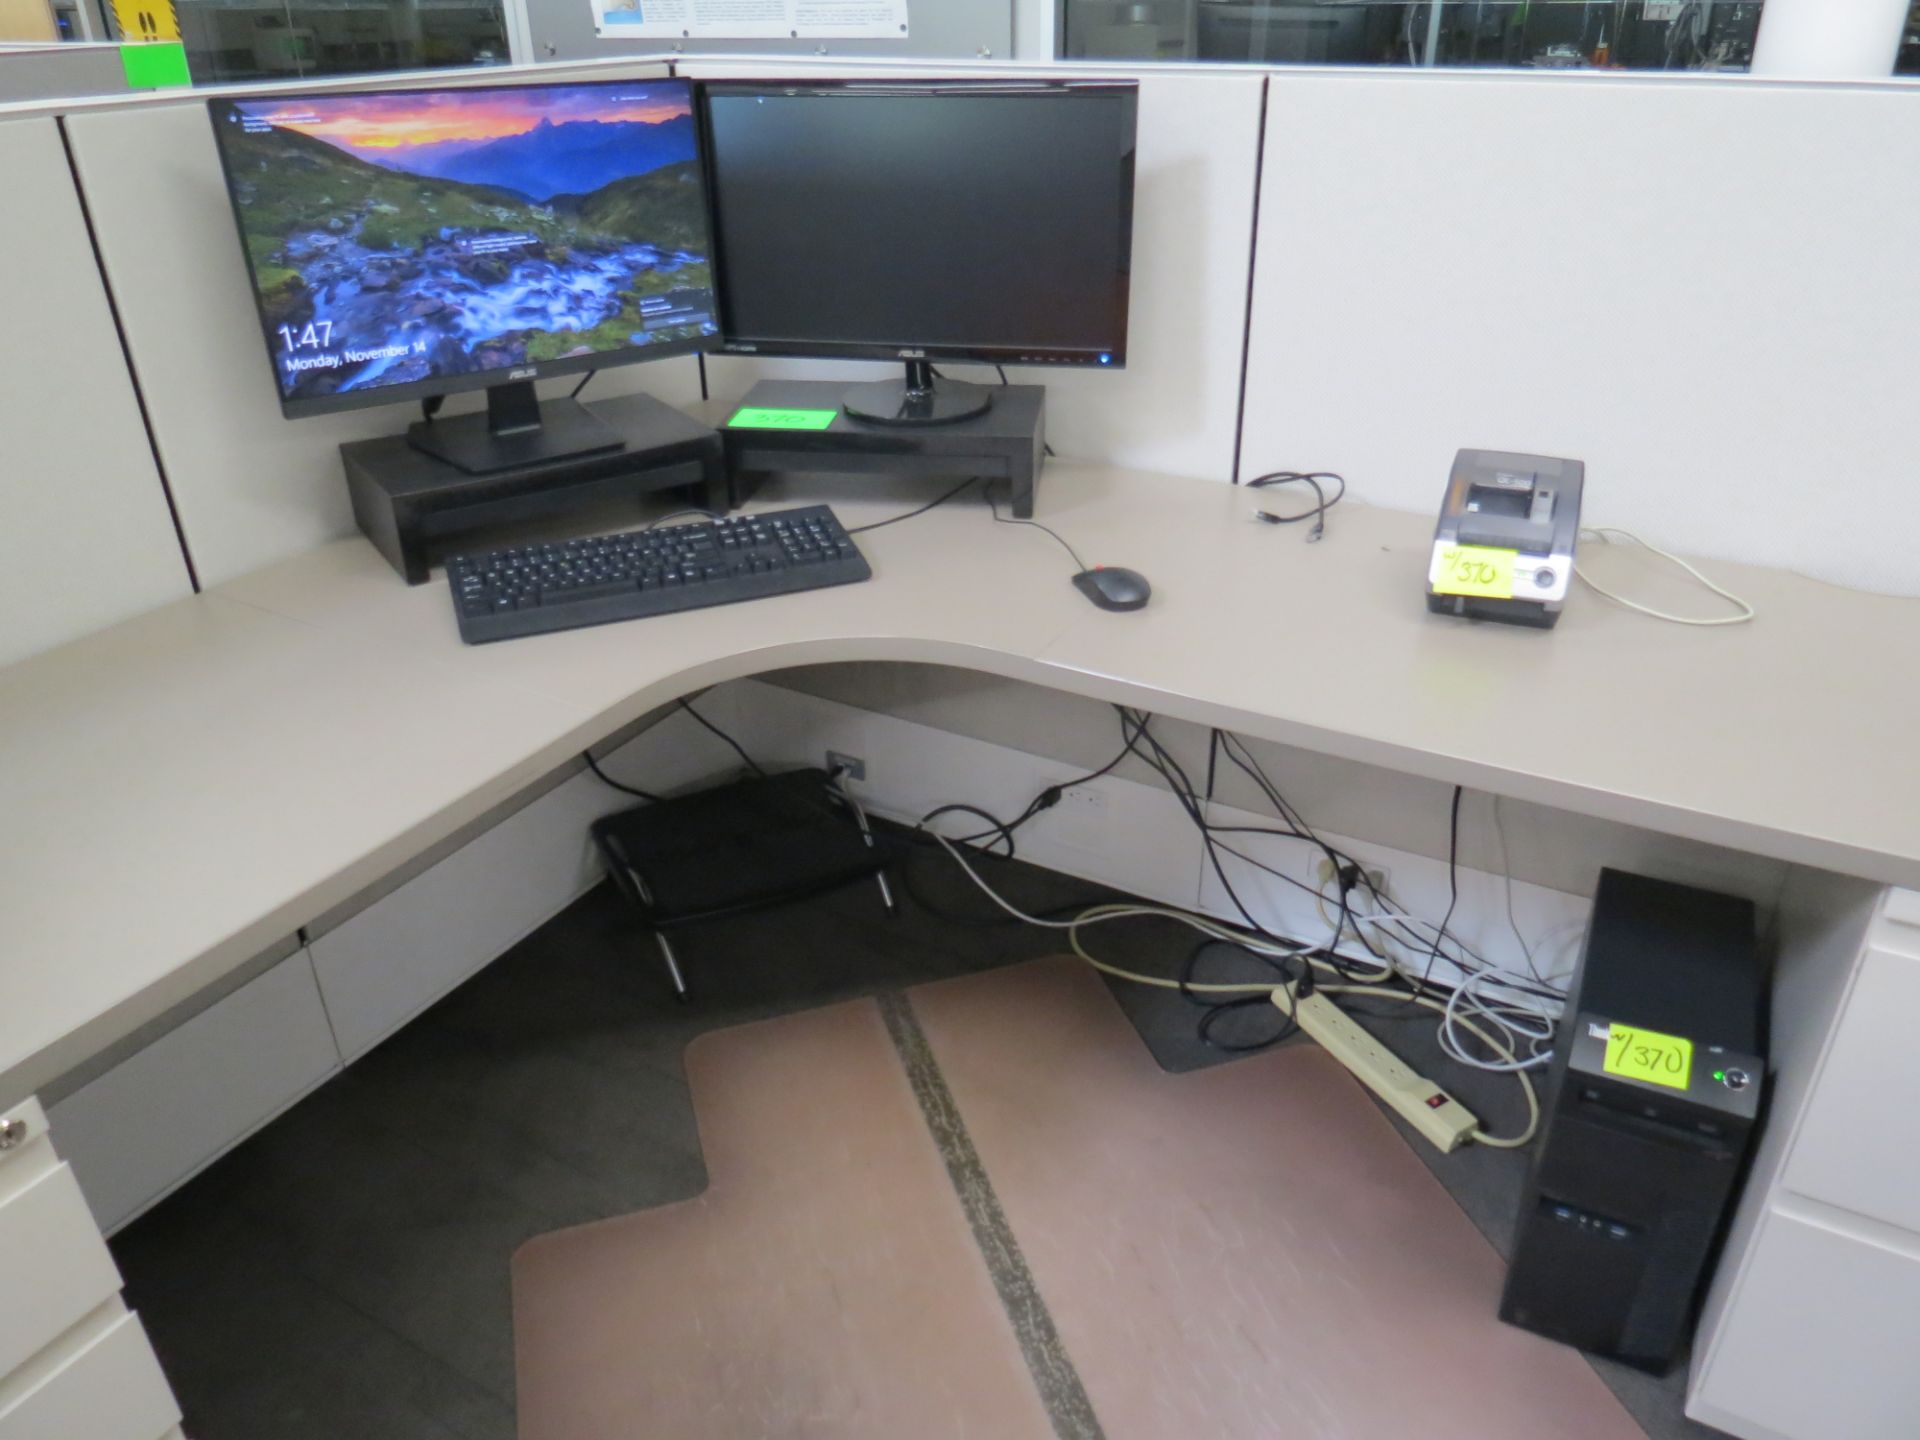 2 LENOVO THINKCENTRE TOWER DESKTOPS, P-TOUCH QL-500 & BROTHER LABEL PRINTERS, 4 MONITORS,